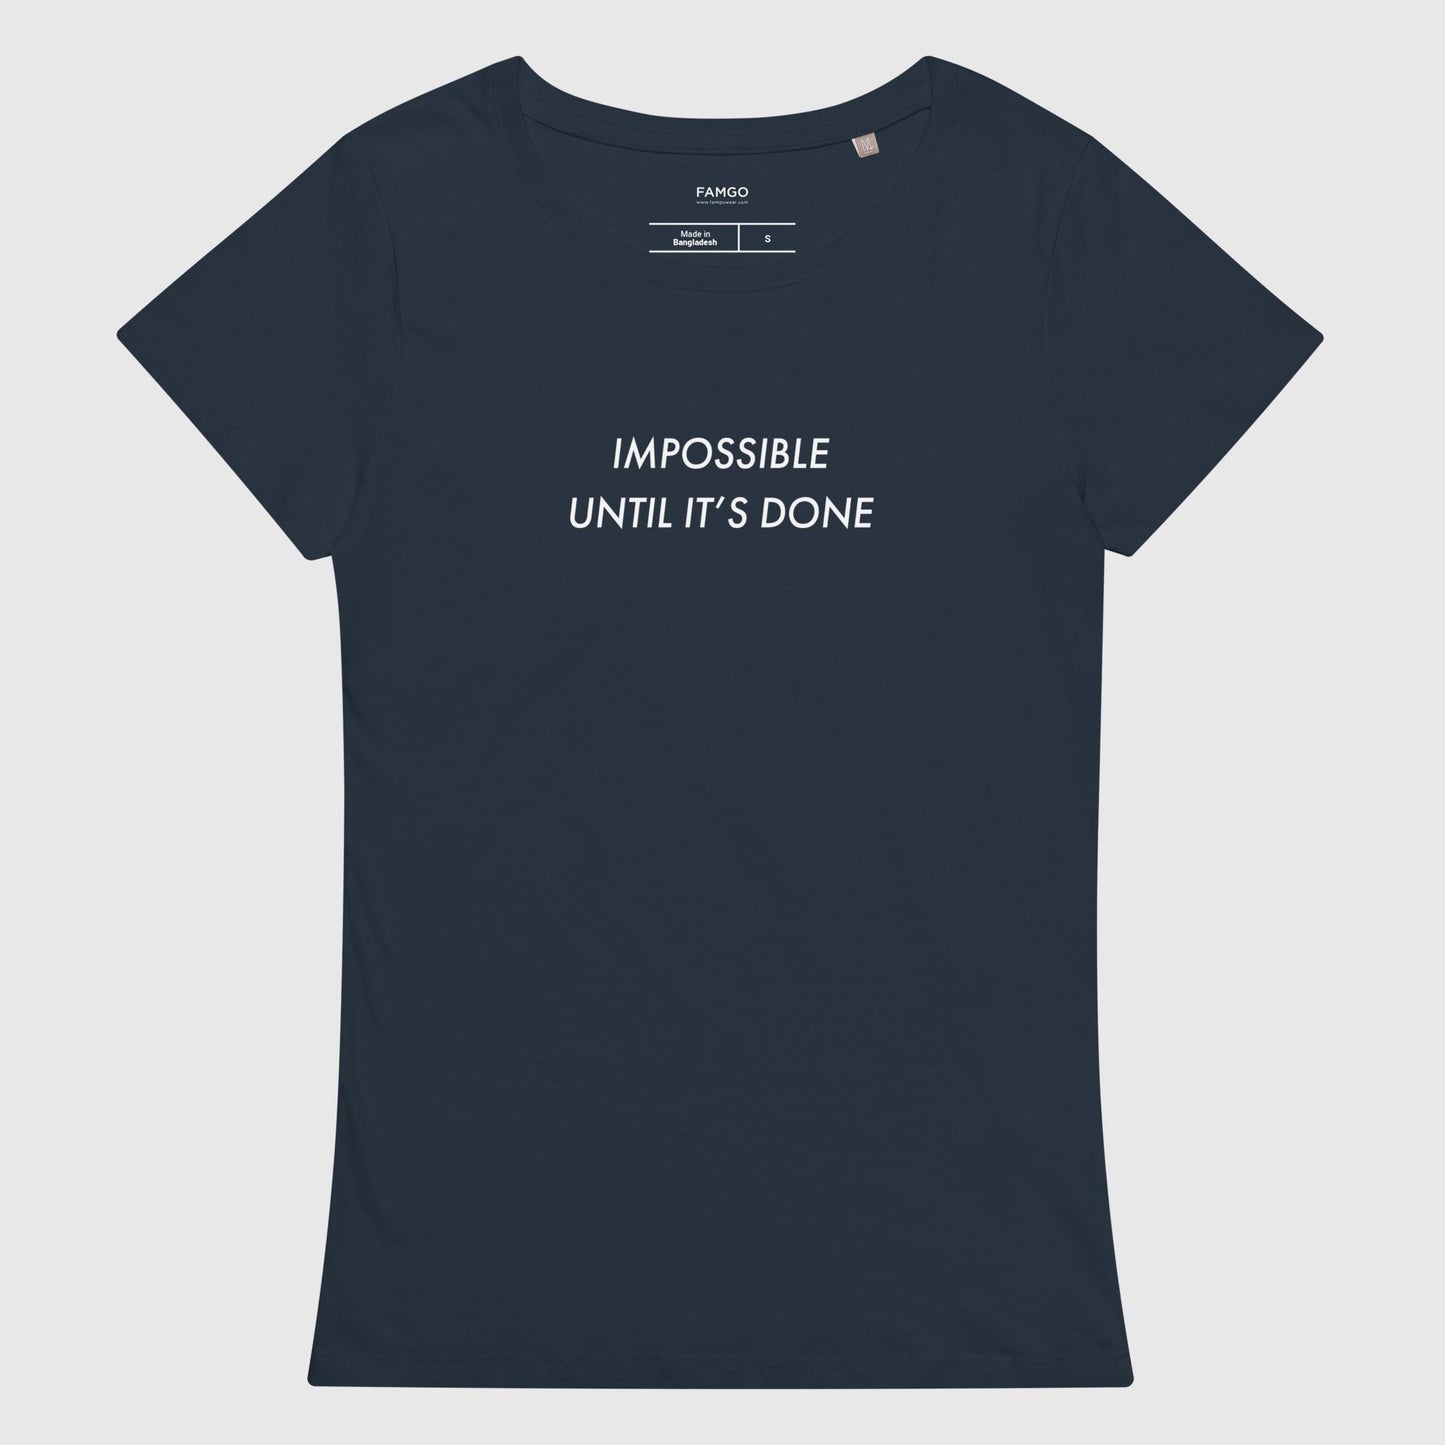 Women's french navy organic cotton t-shirt that features, "Impossible Until It's Done," inspired by Nelson Mandela's inspirational quote, "It always seems impossible until it's done."